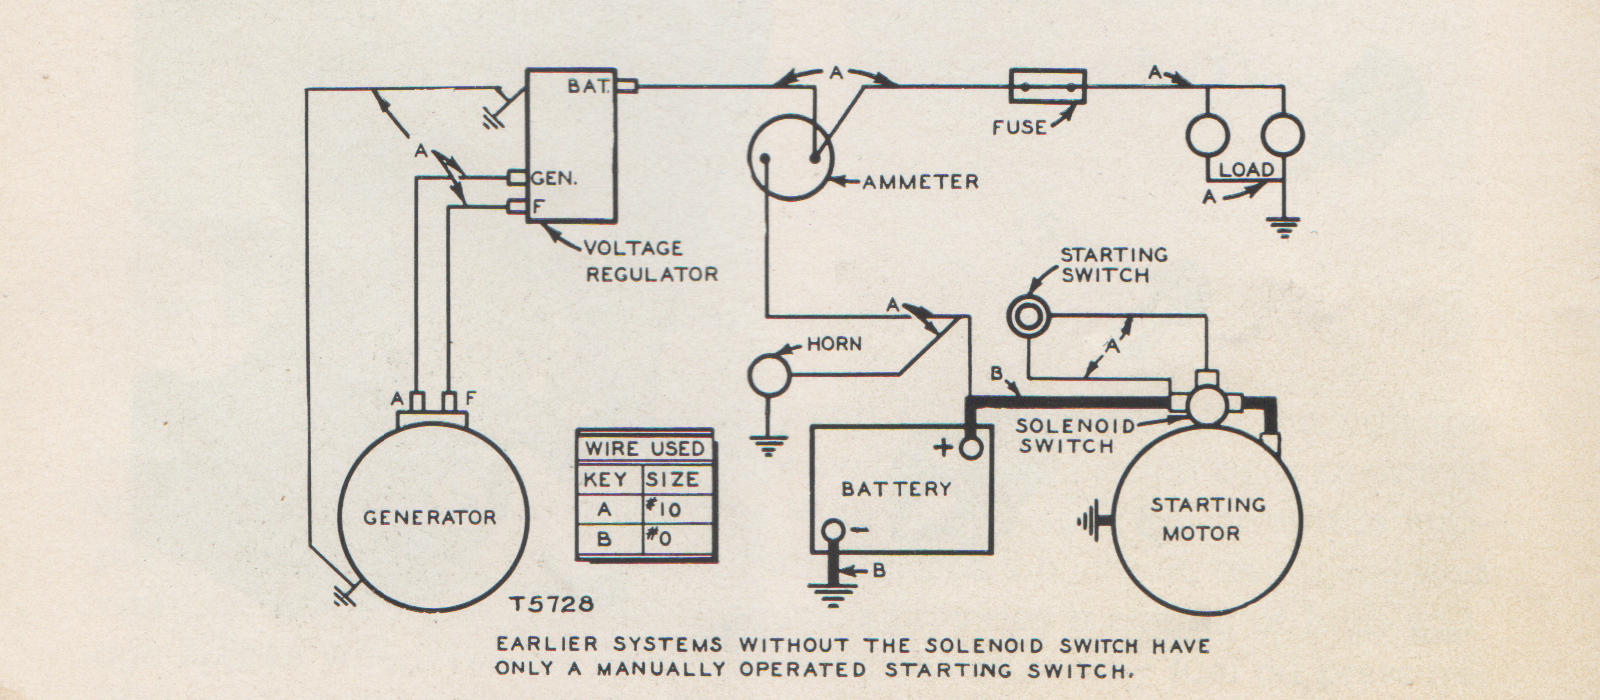 Wiring diagram on a yellowed page with the label "Earlier systems without the solenoid switch have only a manually operated starting switch." Image excerpted from Operators Instructions for Caterpillar Diesel D318 Engine and Electric Set, p96.